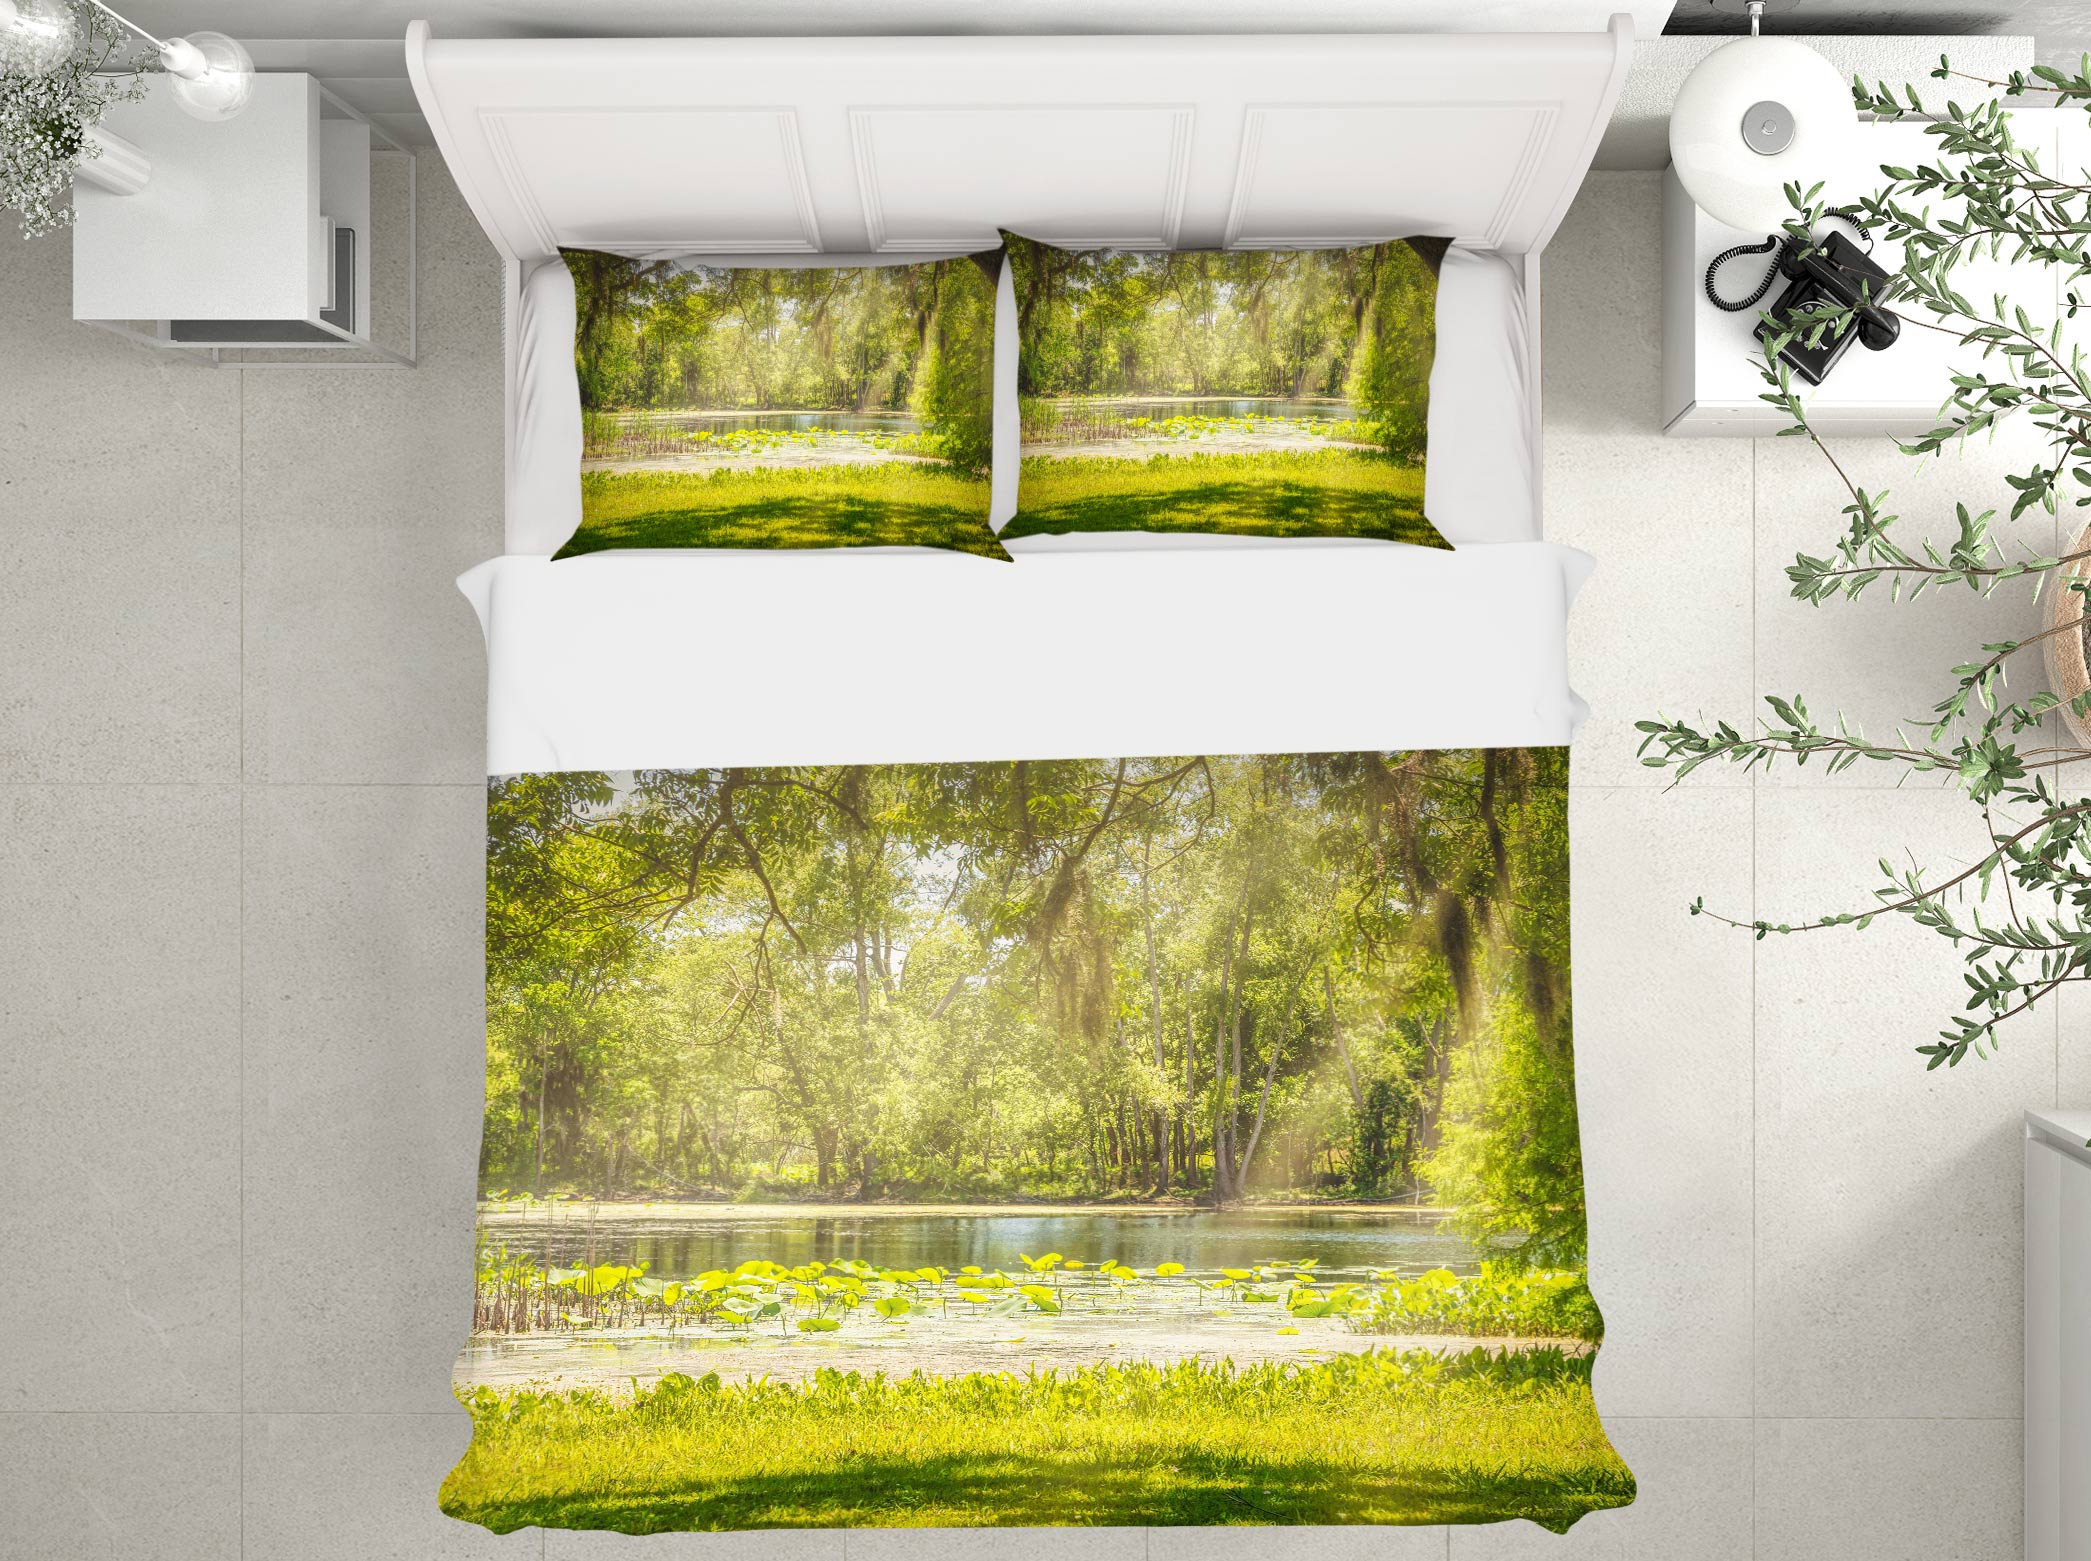 3D Lakeside Grass Tree 8572 Beth Sheridan Bedding Bed Pillowcases Quilt